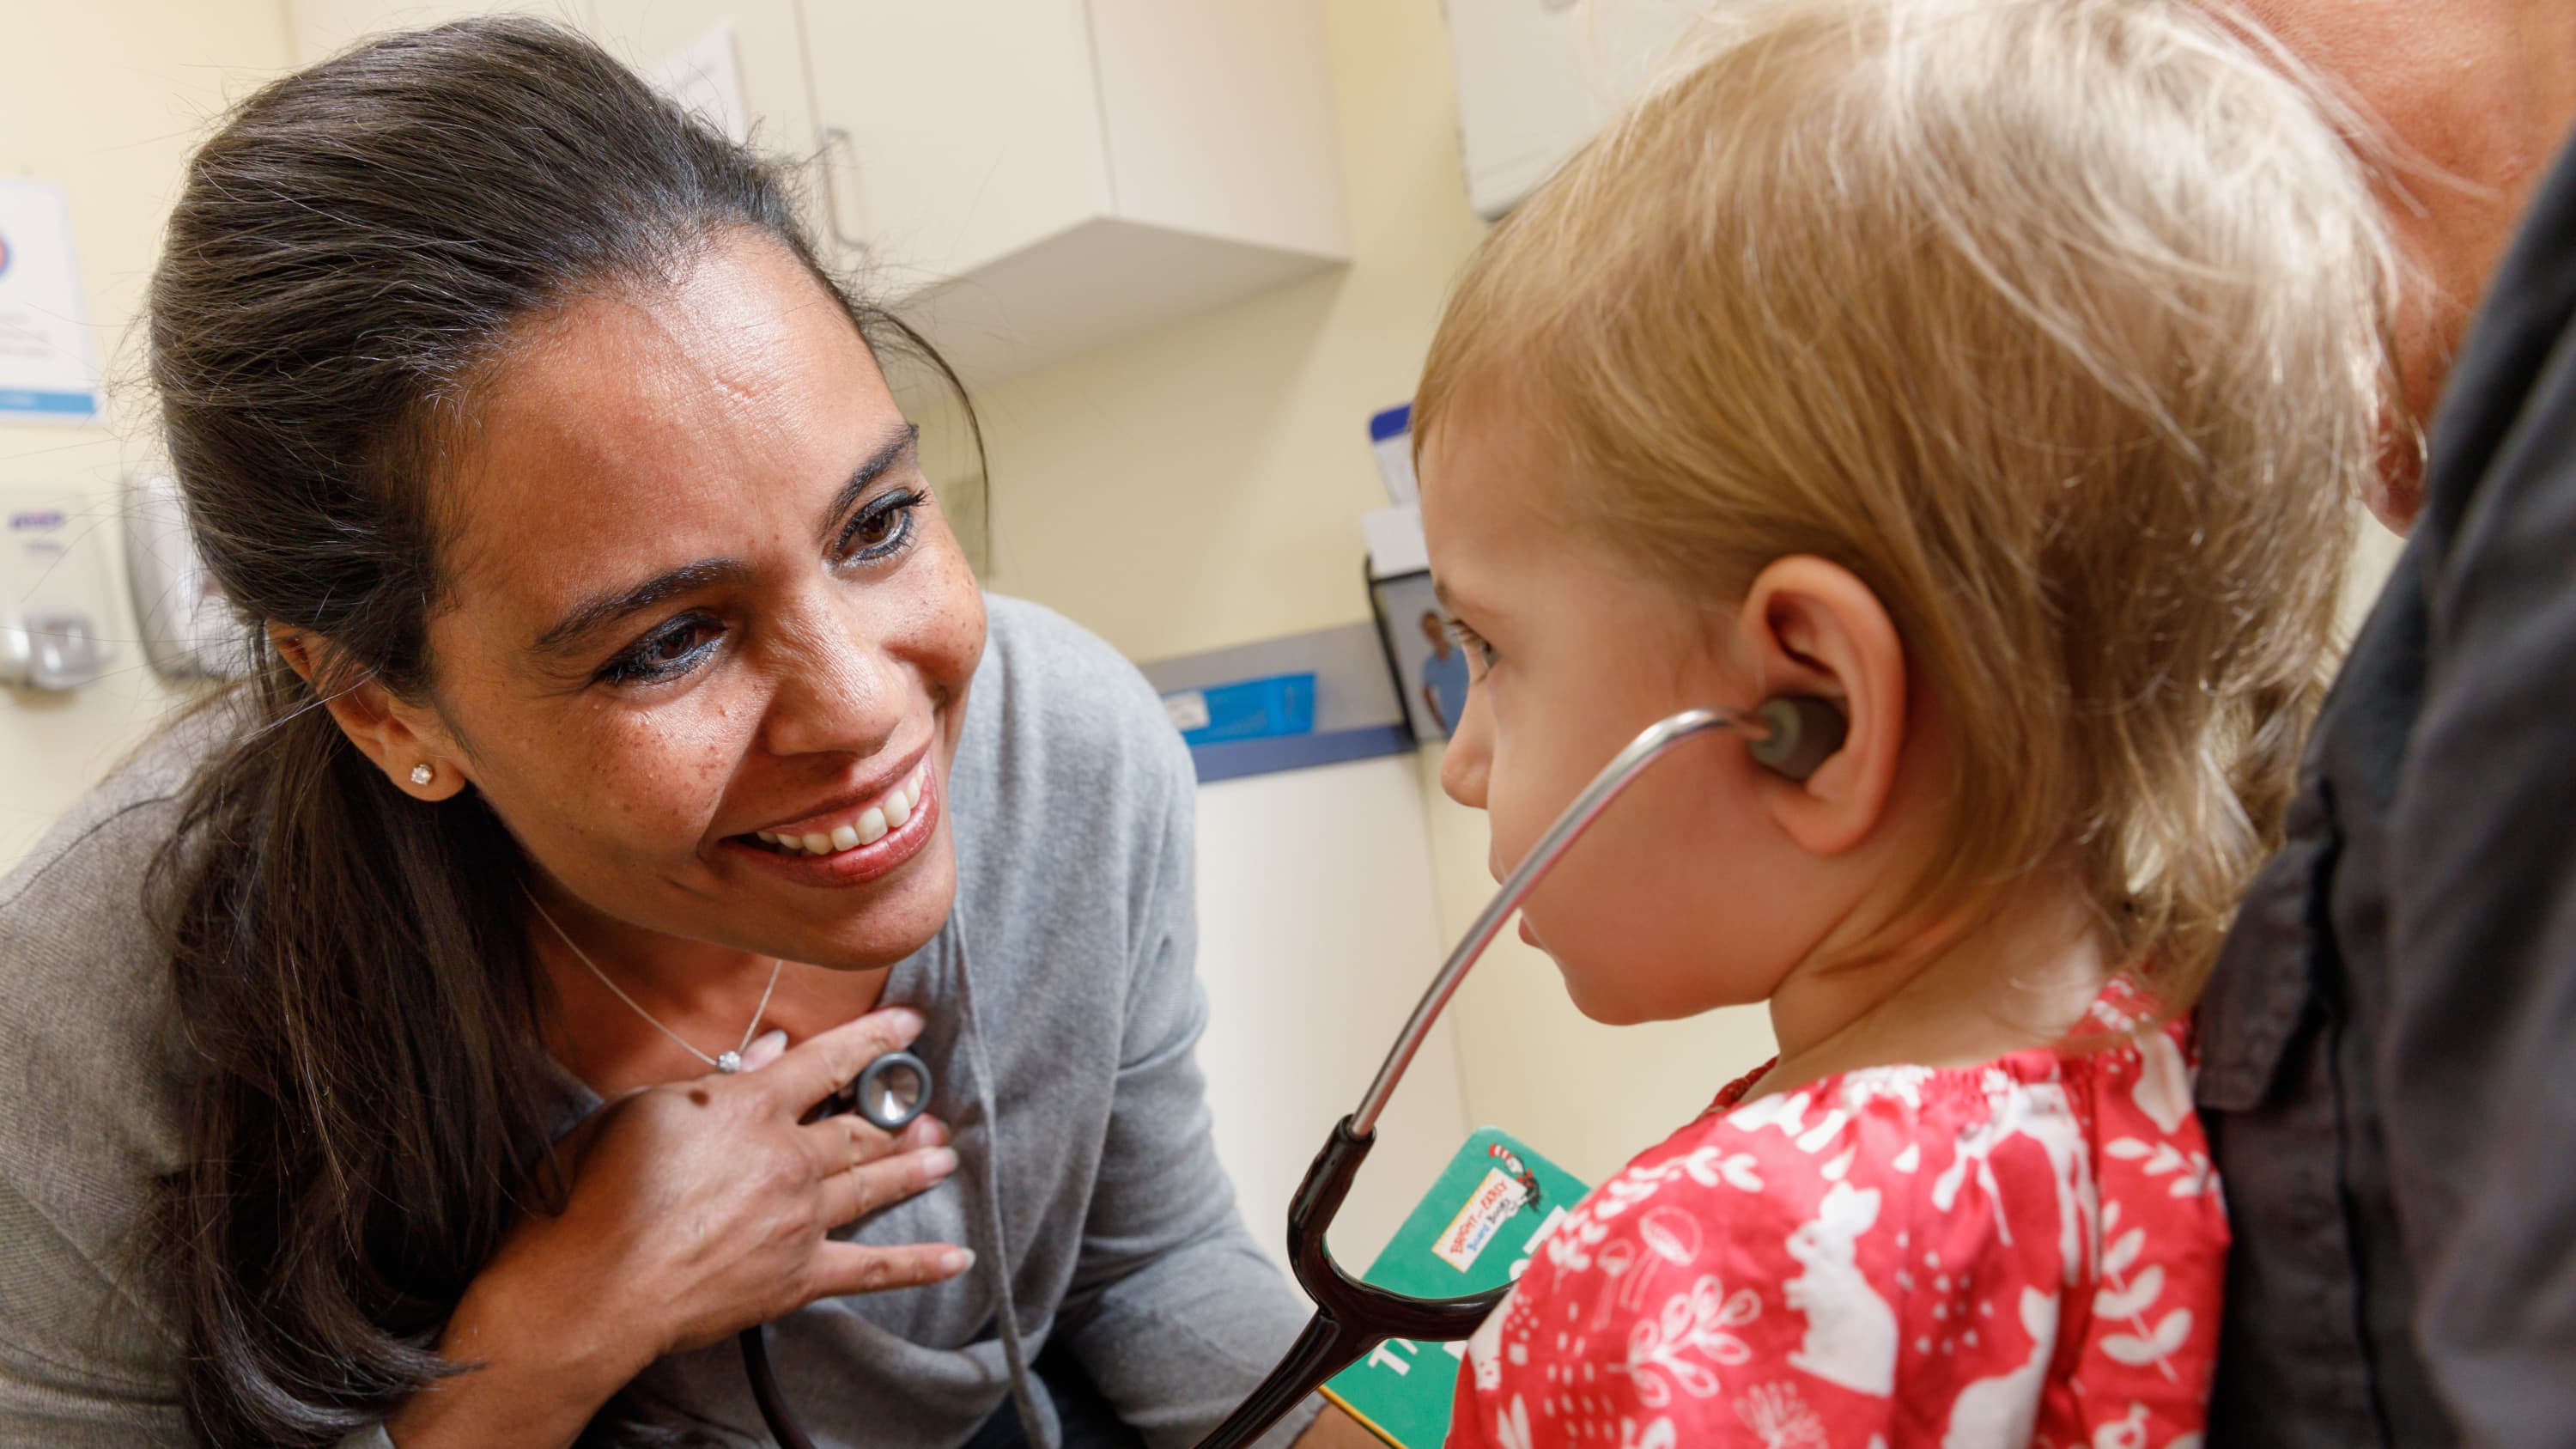 Dr. Annette Cameron is making a young patient feel comfortable by having her listen to her heartbeat using a stethoscope.